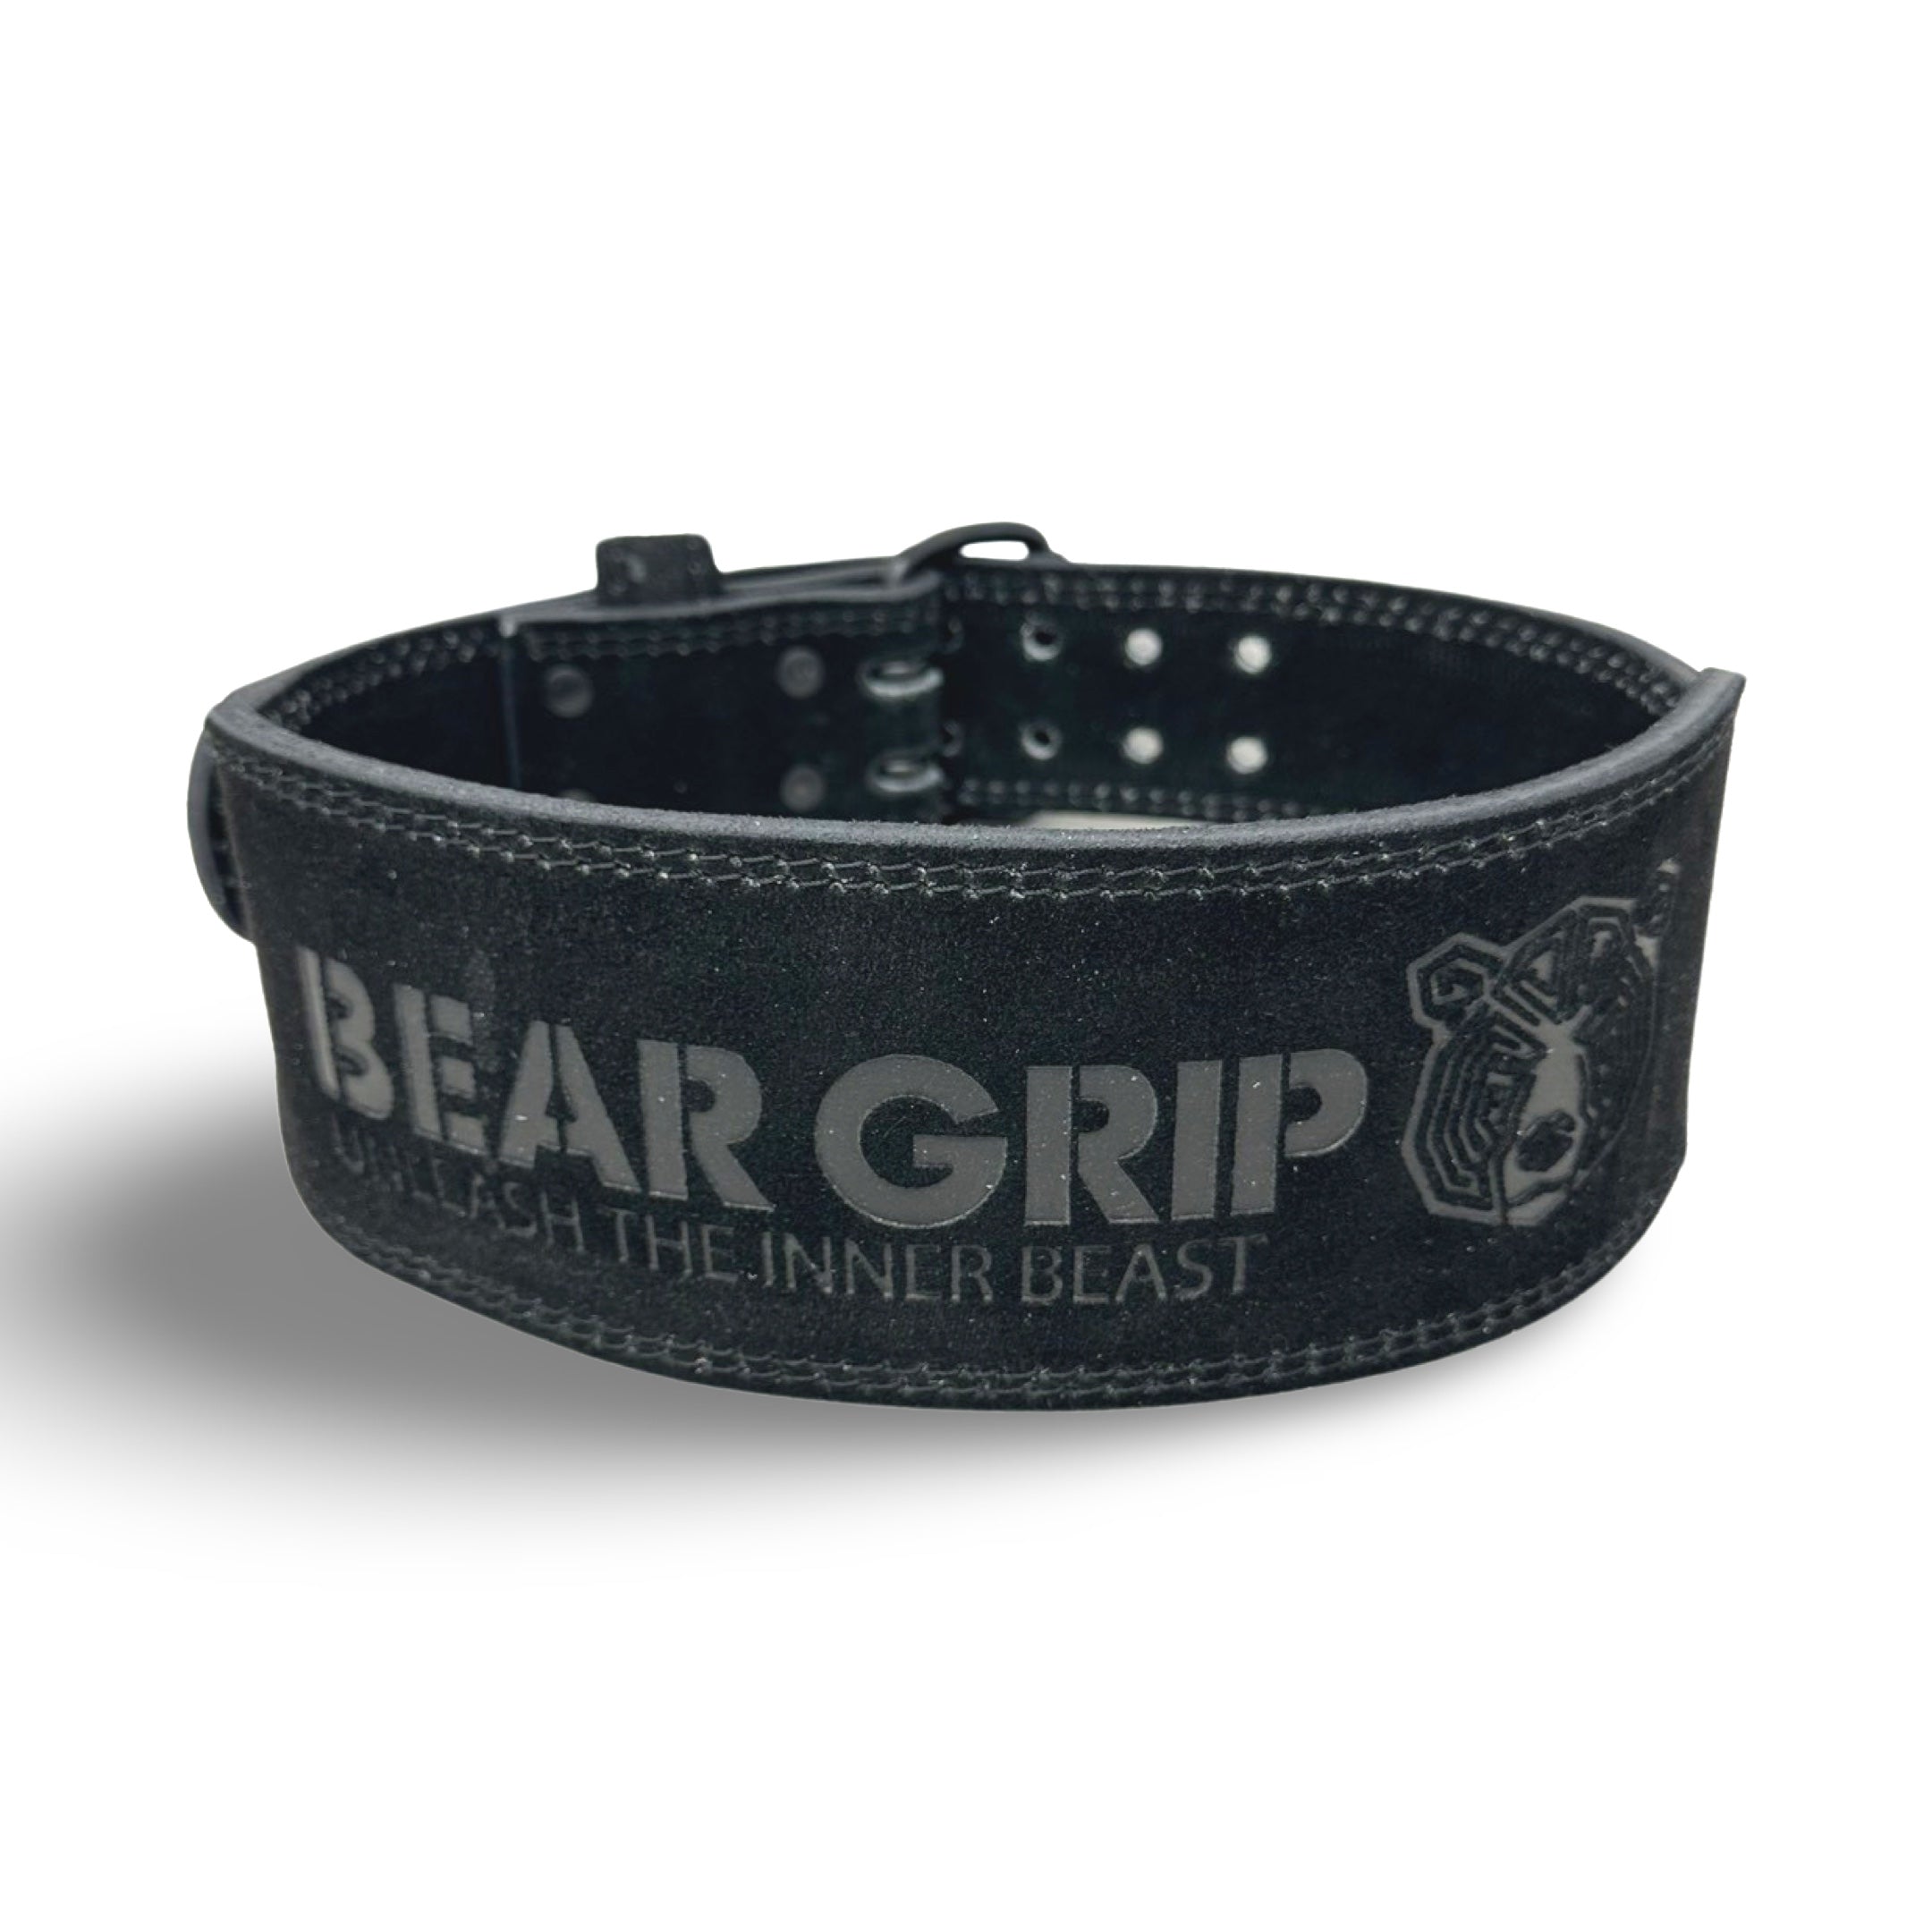 BEAR GRIP - Premium Suede Double Prong Weight Lifting Belt